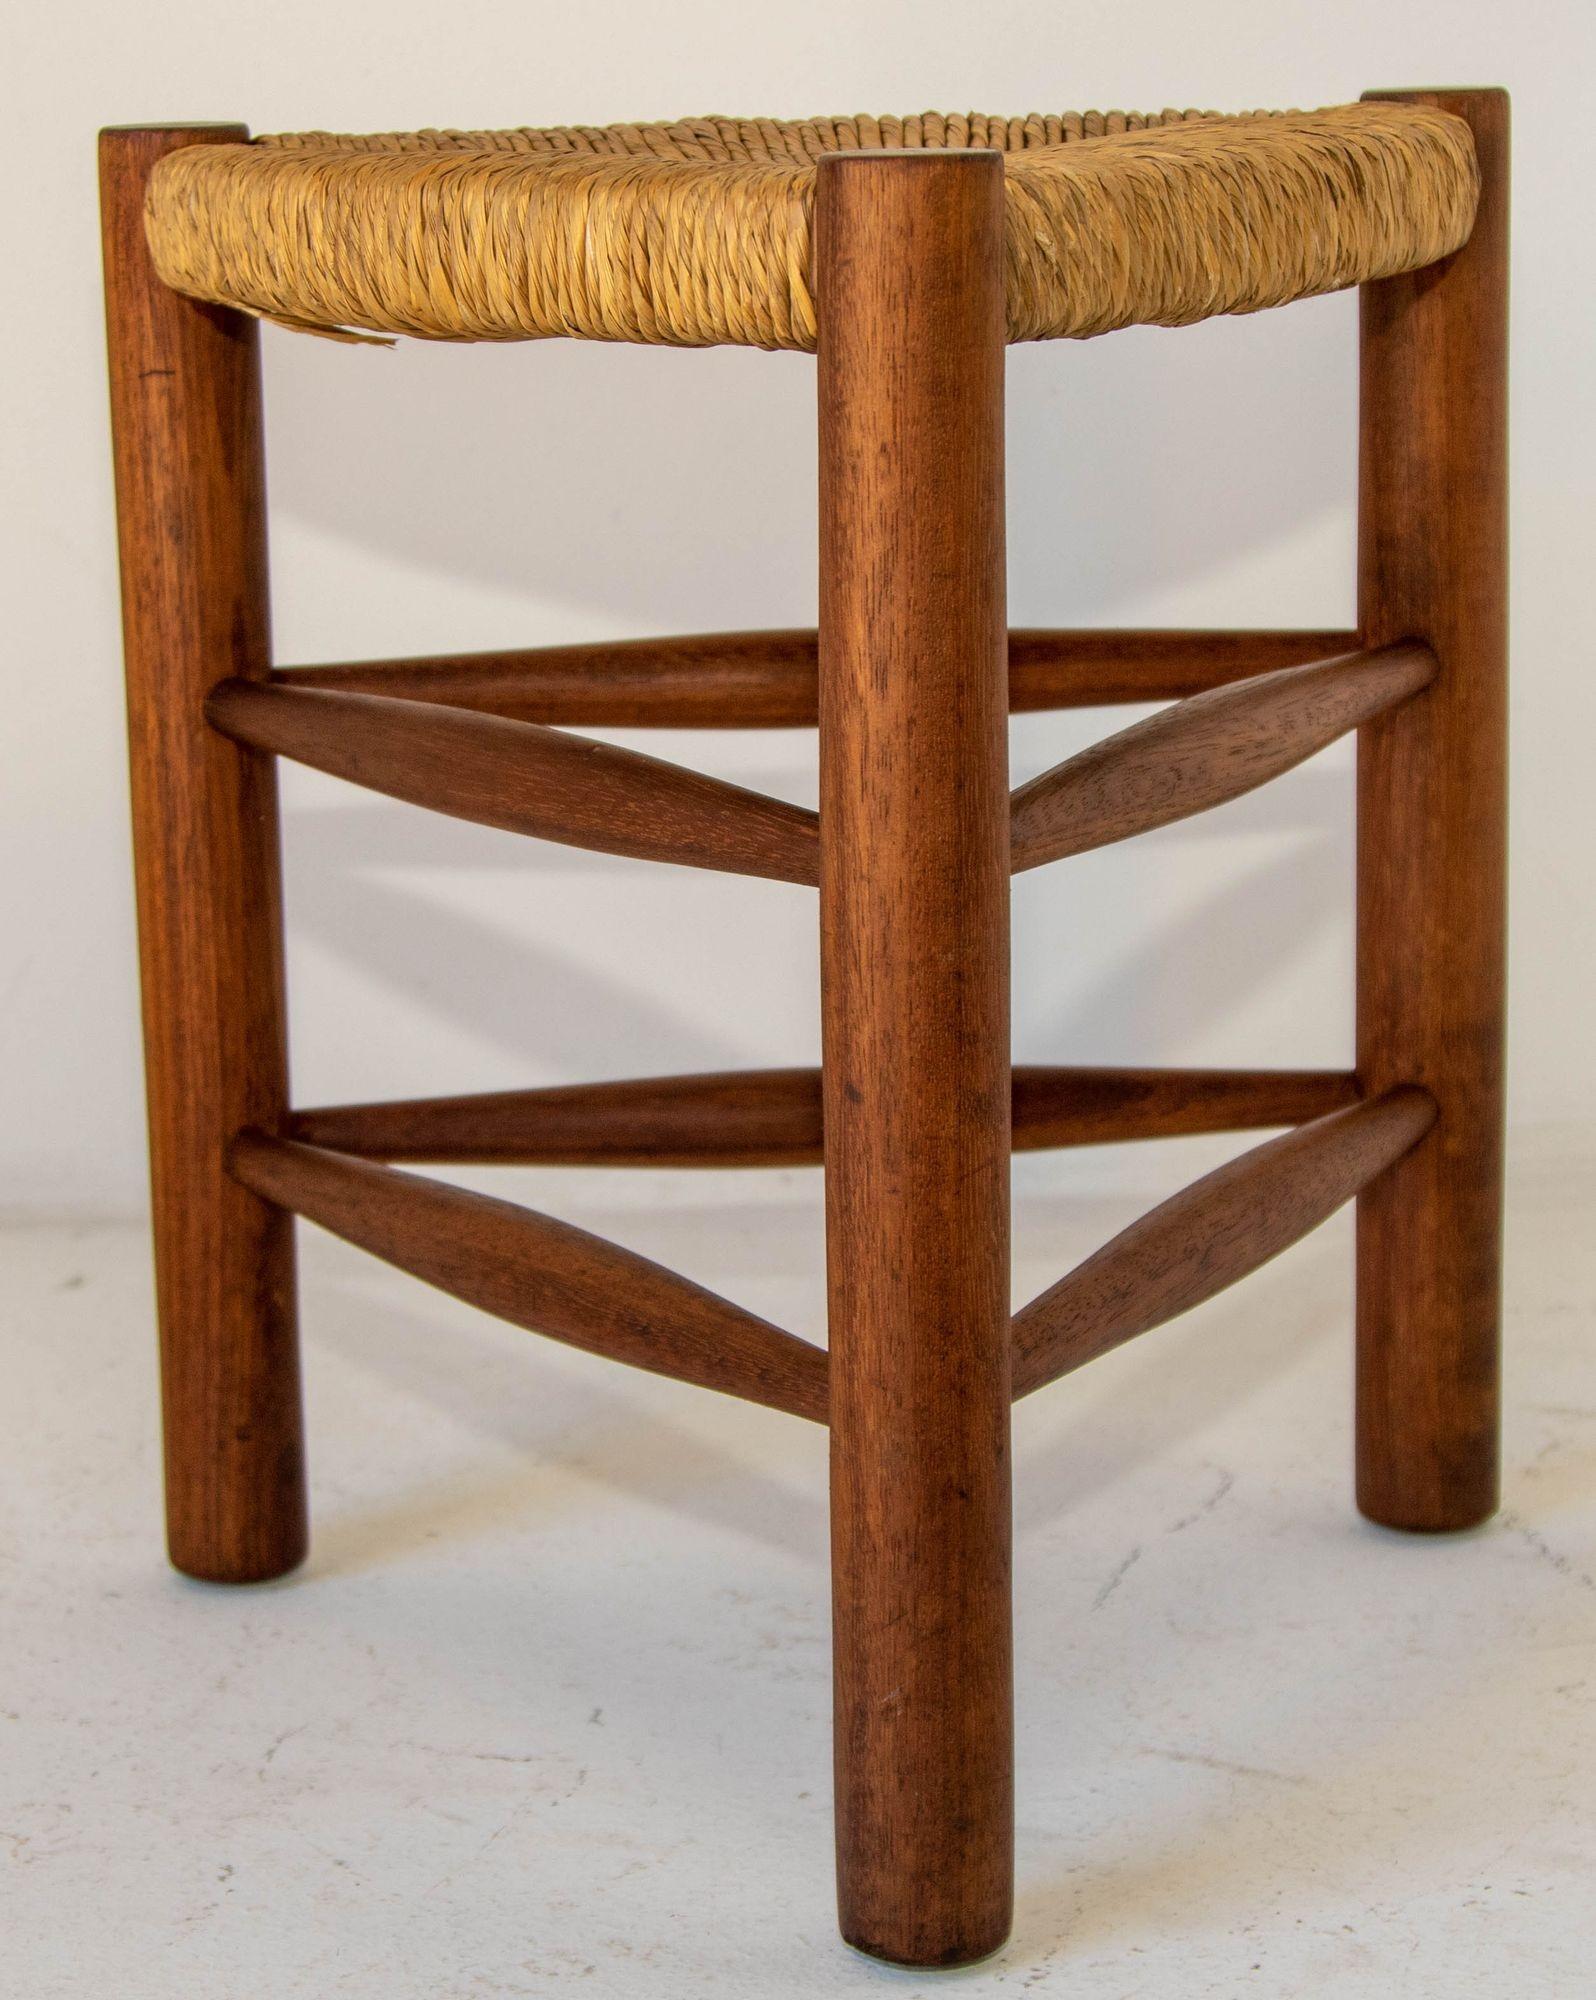 20th Century Vintage French Rush Woven Tripod Wooden Stool 1950 Charlotte Perriand Style For Sale